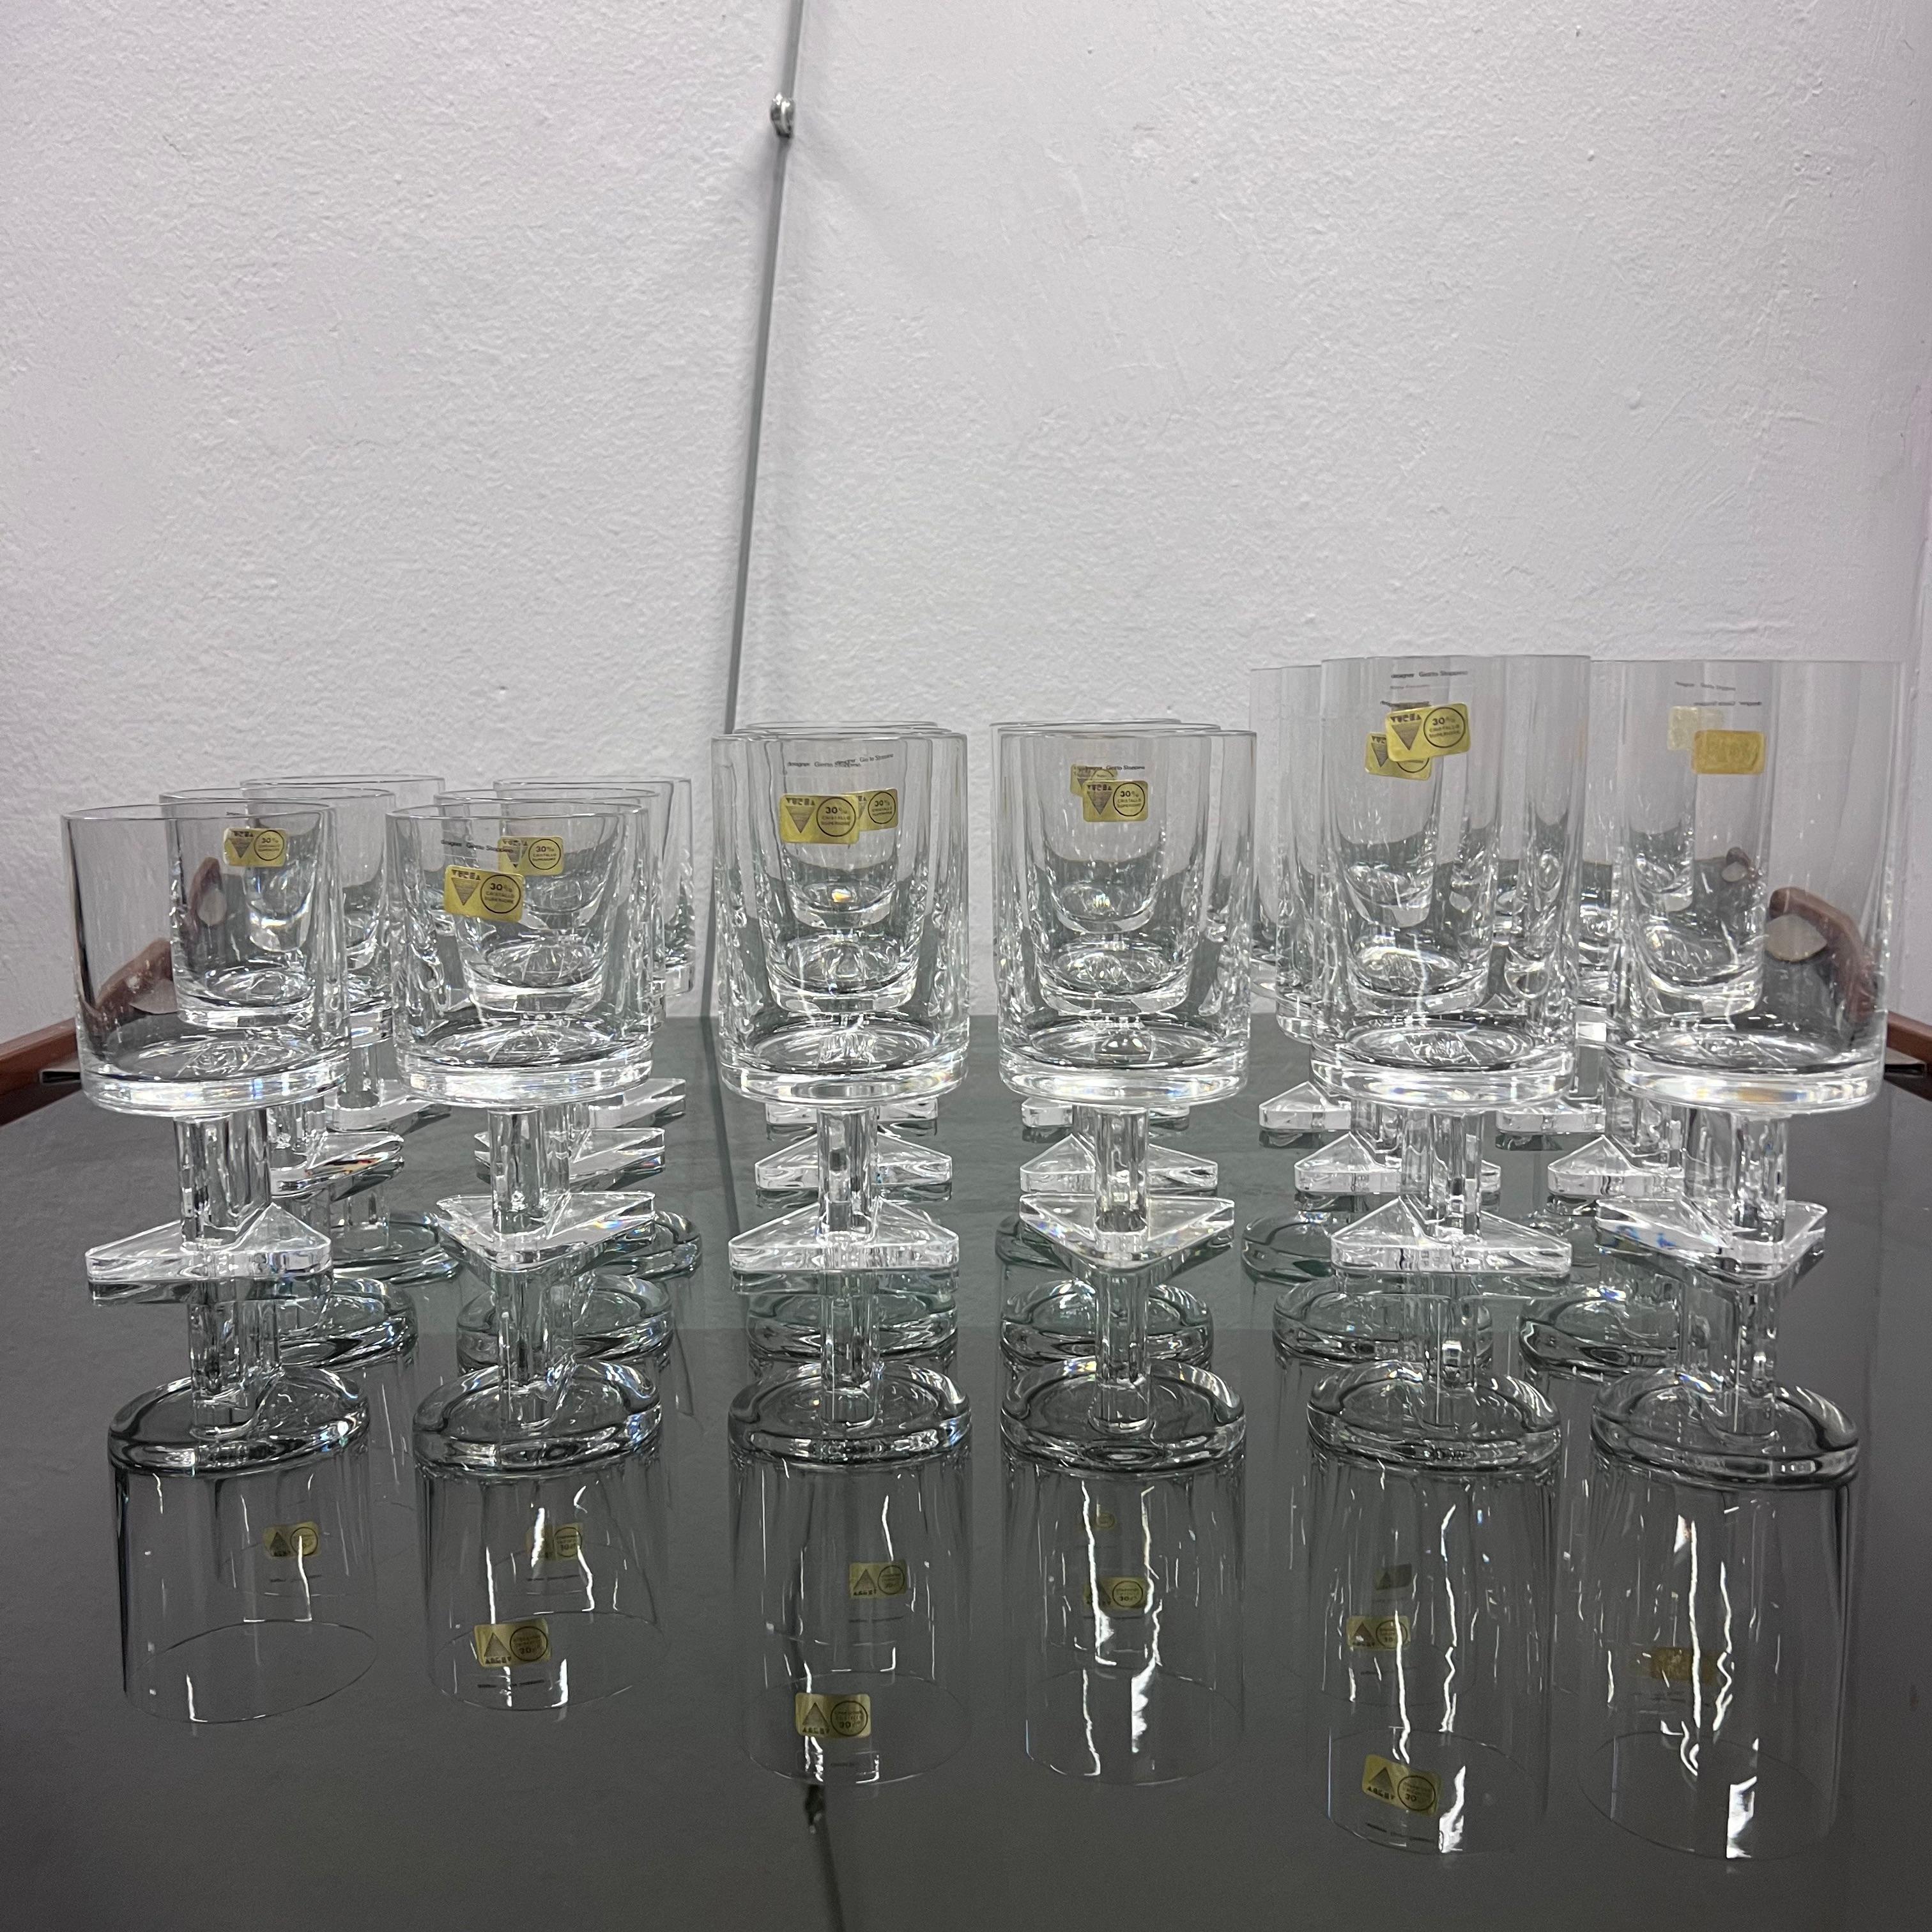 Italian Set of 6 Glasses - 18 pcs tot - by Giotto Stoppino for Vursa - Italy '70s For Sale